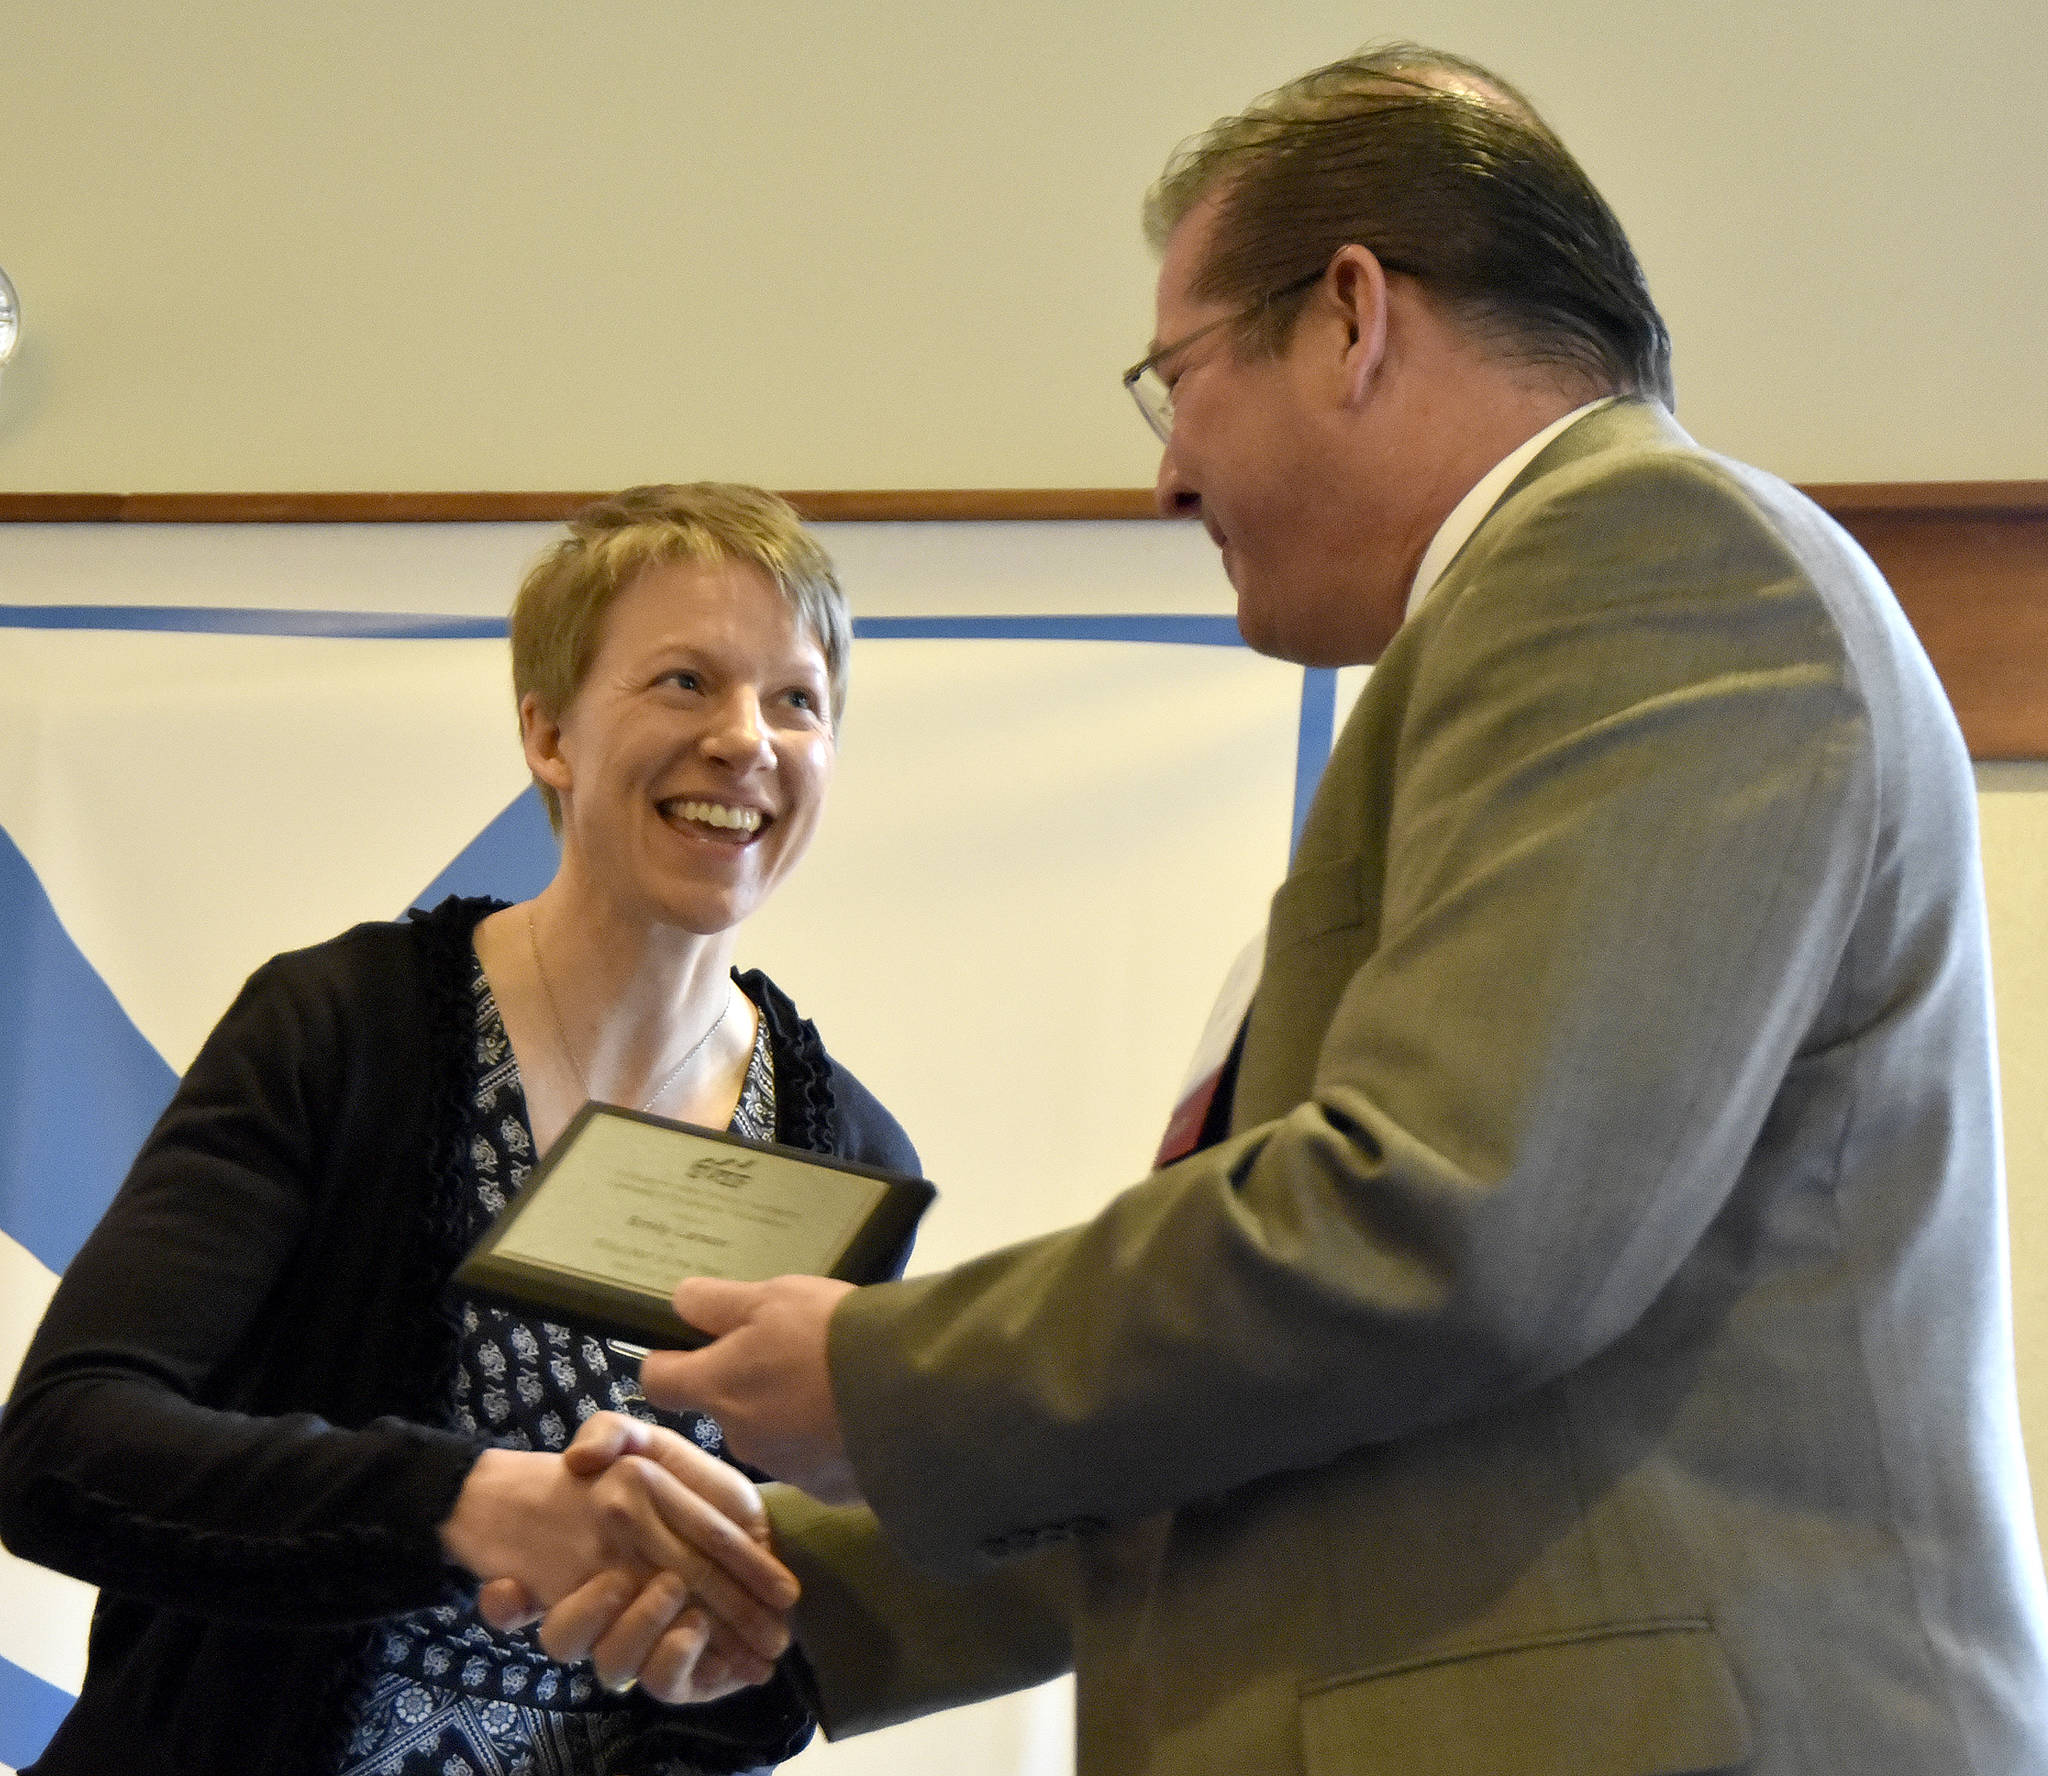 Emily Larson accepts the Elementary Educator of the Year award from Snoqualmie Valley School District Superintendent Joel Aune March 23 at the Snoqualmie Valley Schools Foundation luncheon. Carol Ladwig/Staff Photo